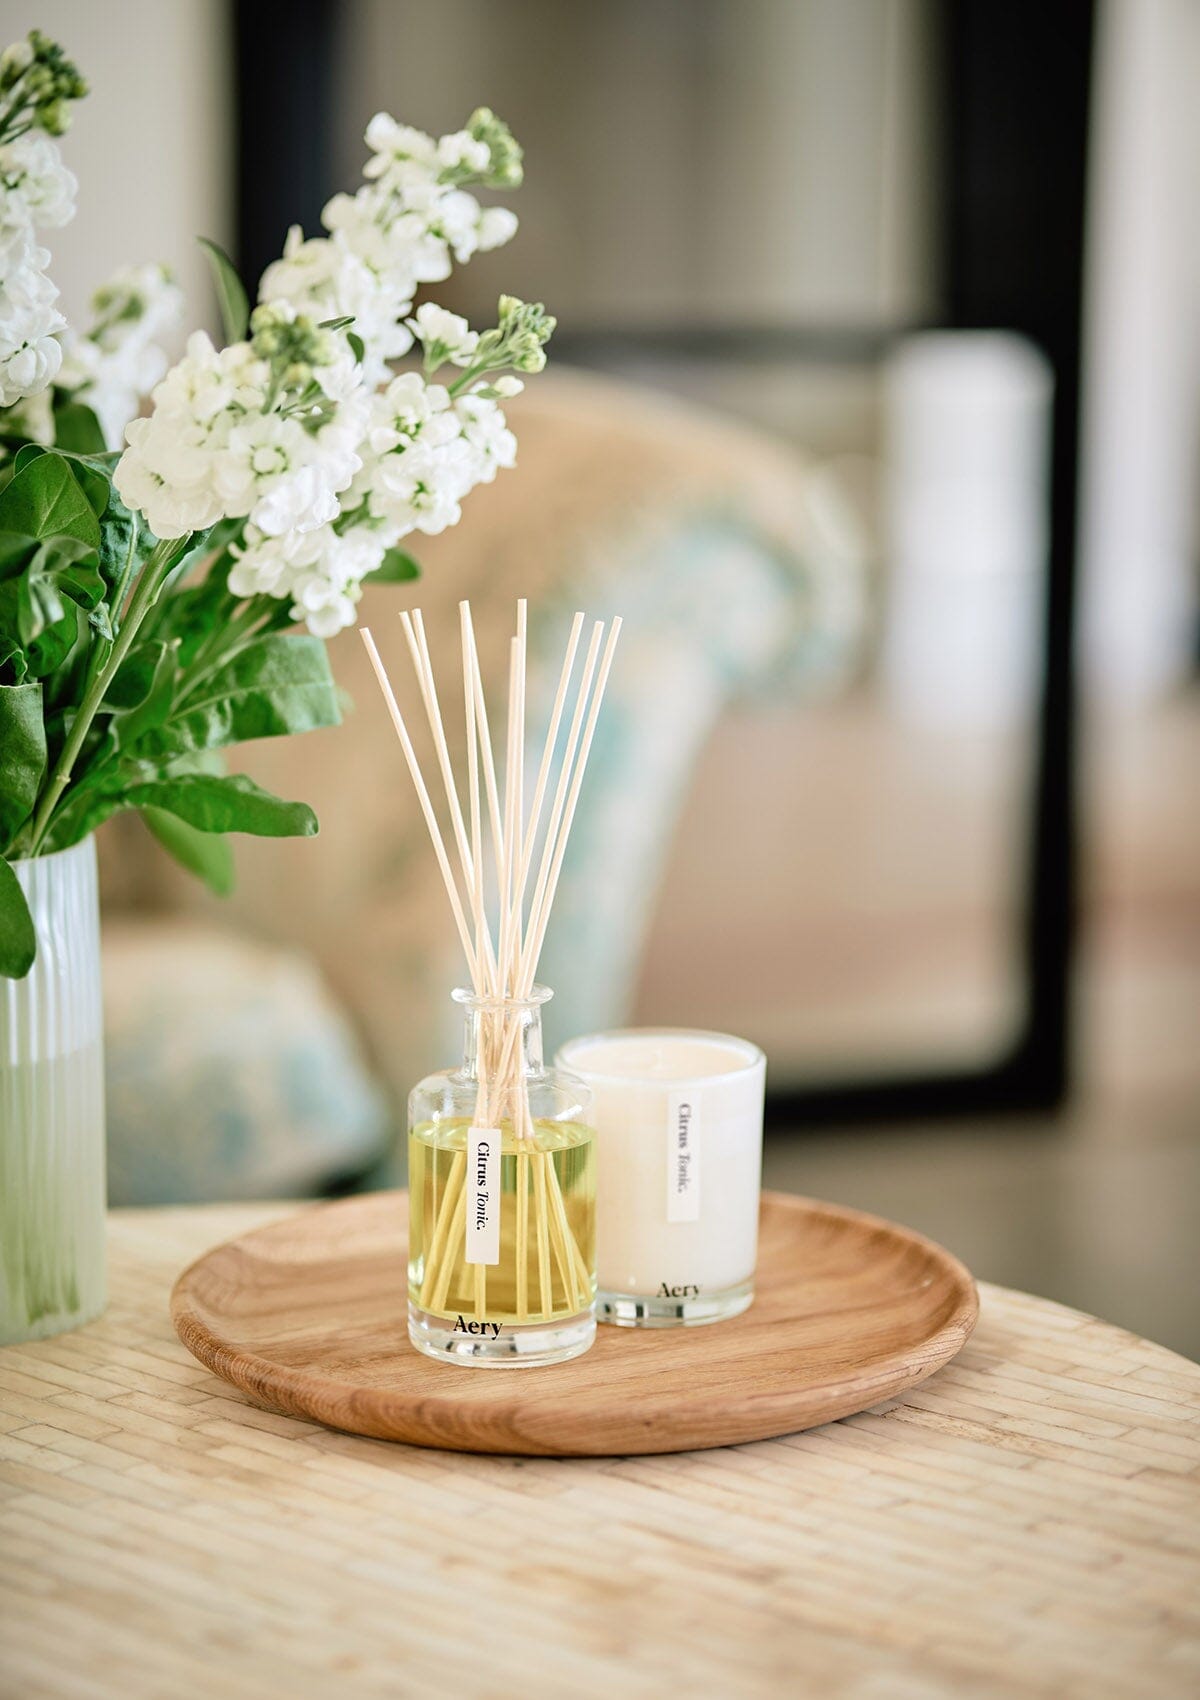 Citrus Tonic diffuser displayed next to citrus tonic candle placed on wooden table next to vase of flowers 